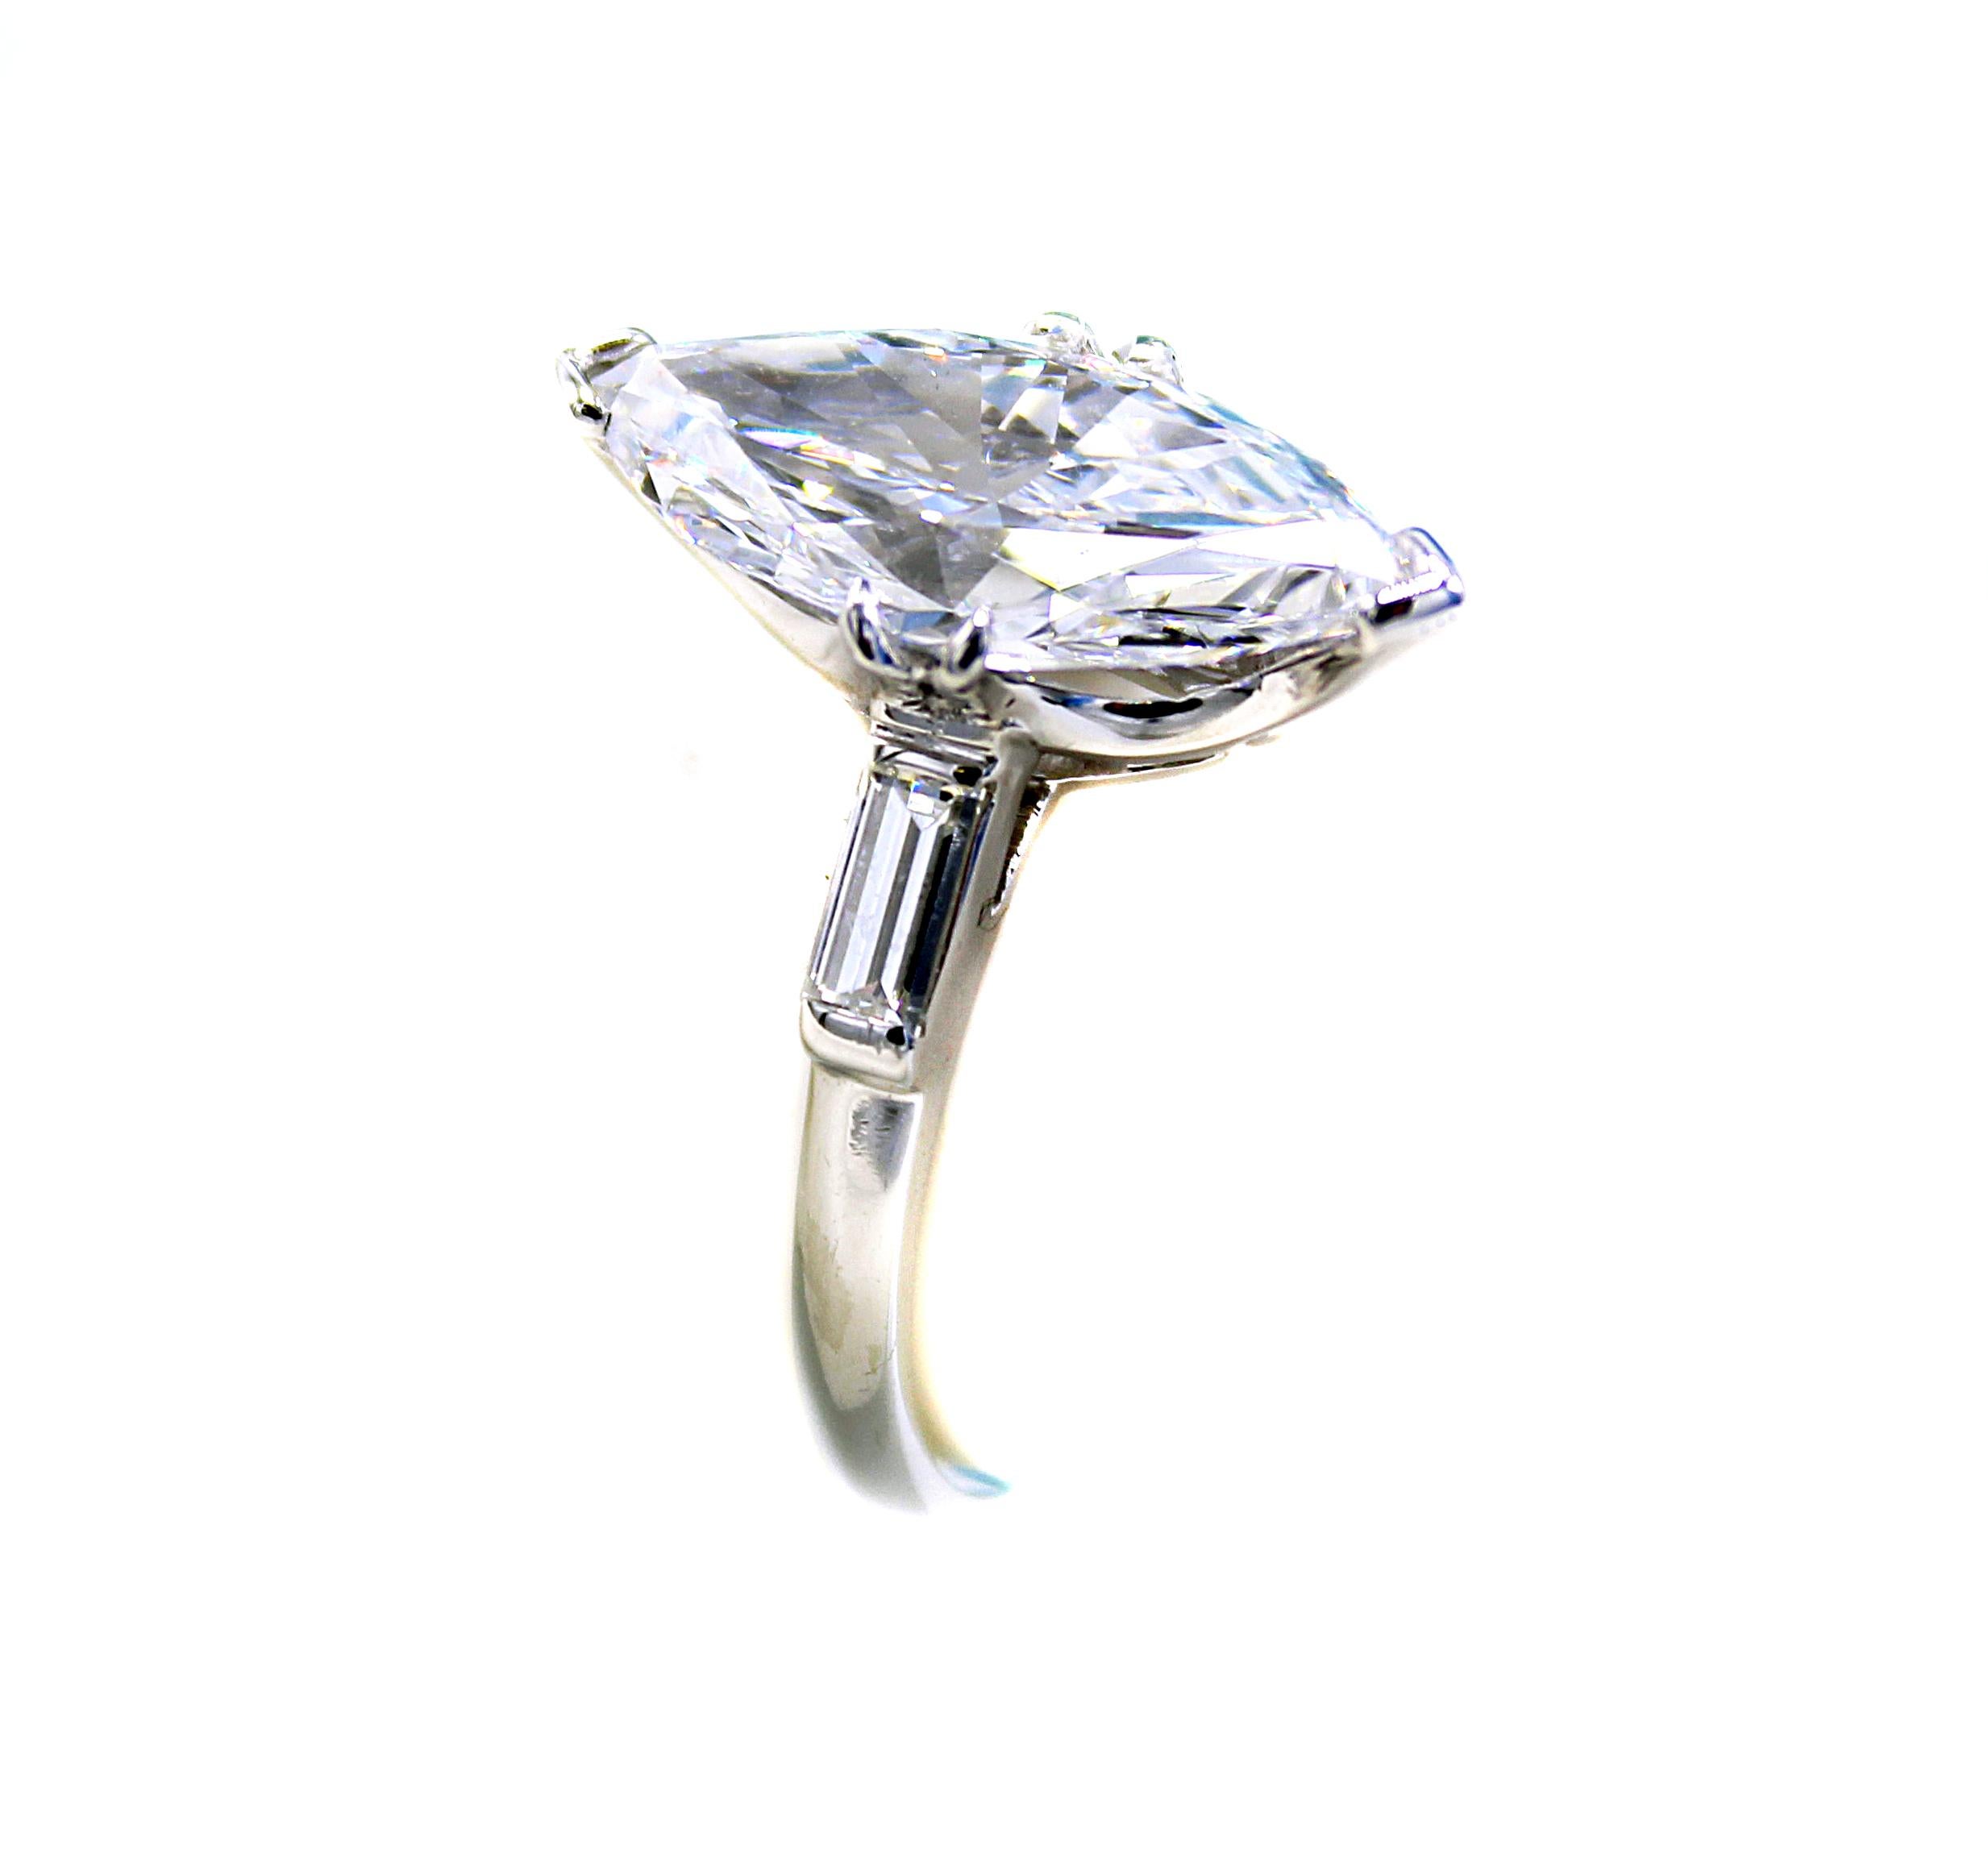 This exquisite marquis brilliant is a true rarity and a beauty on every finger. Having been graded by the GIA with the highest color grade of D and a clarity of Internally Flawless it is also among the few to have been classified as Type IIA. The